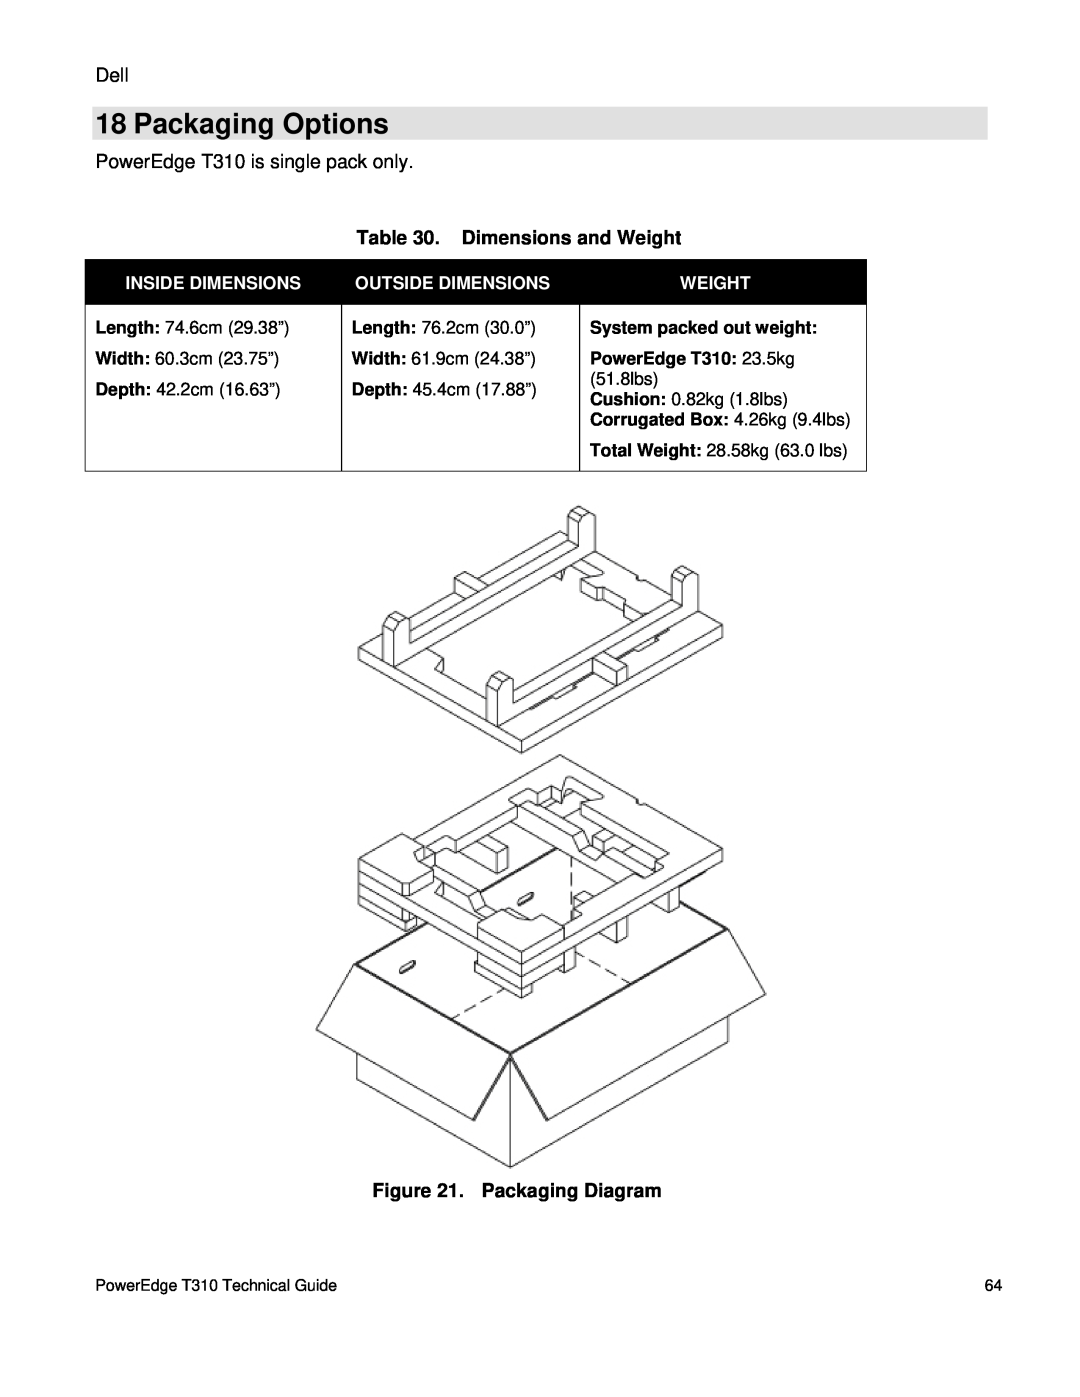 Dell T310 manual Packaging Options, Dimensions and Weight, Packaging Diagram, Inside Dimensions, Outside Dimensions 